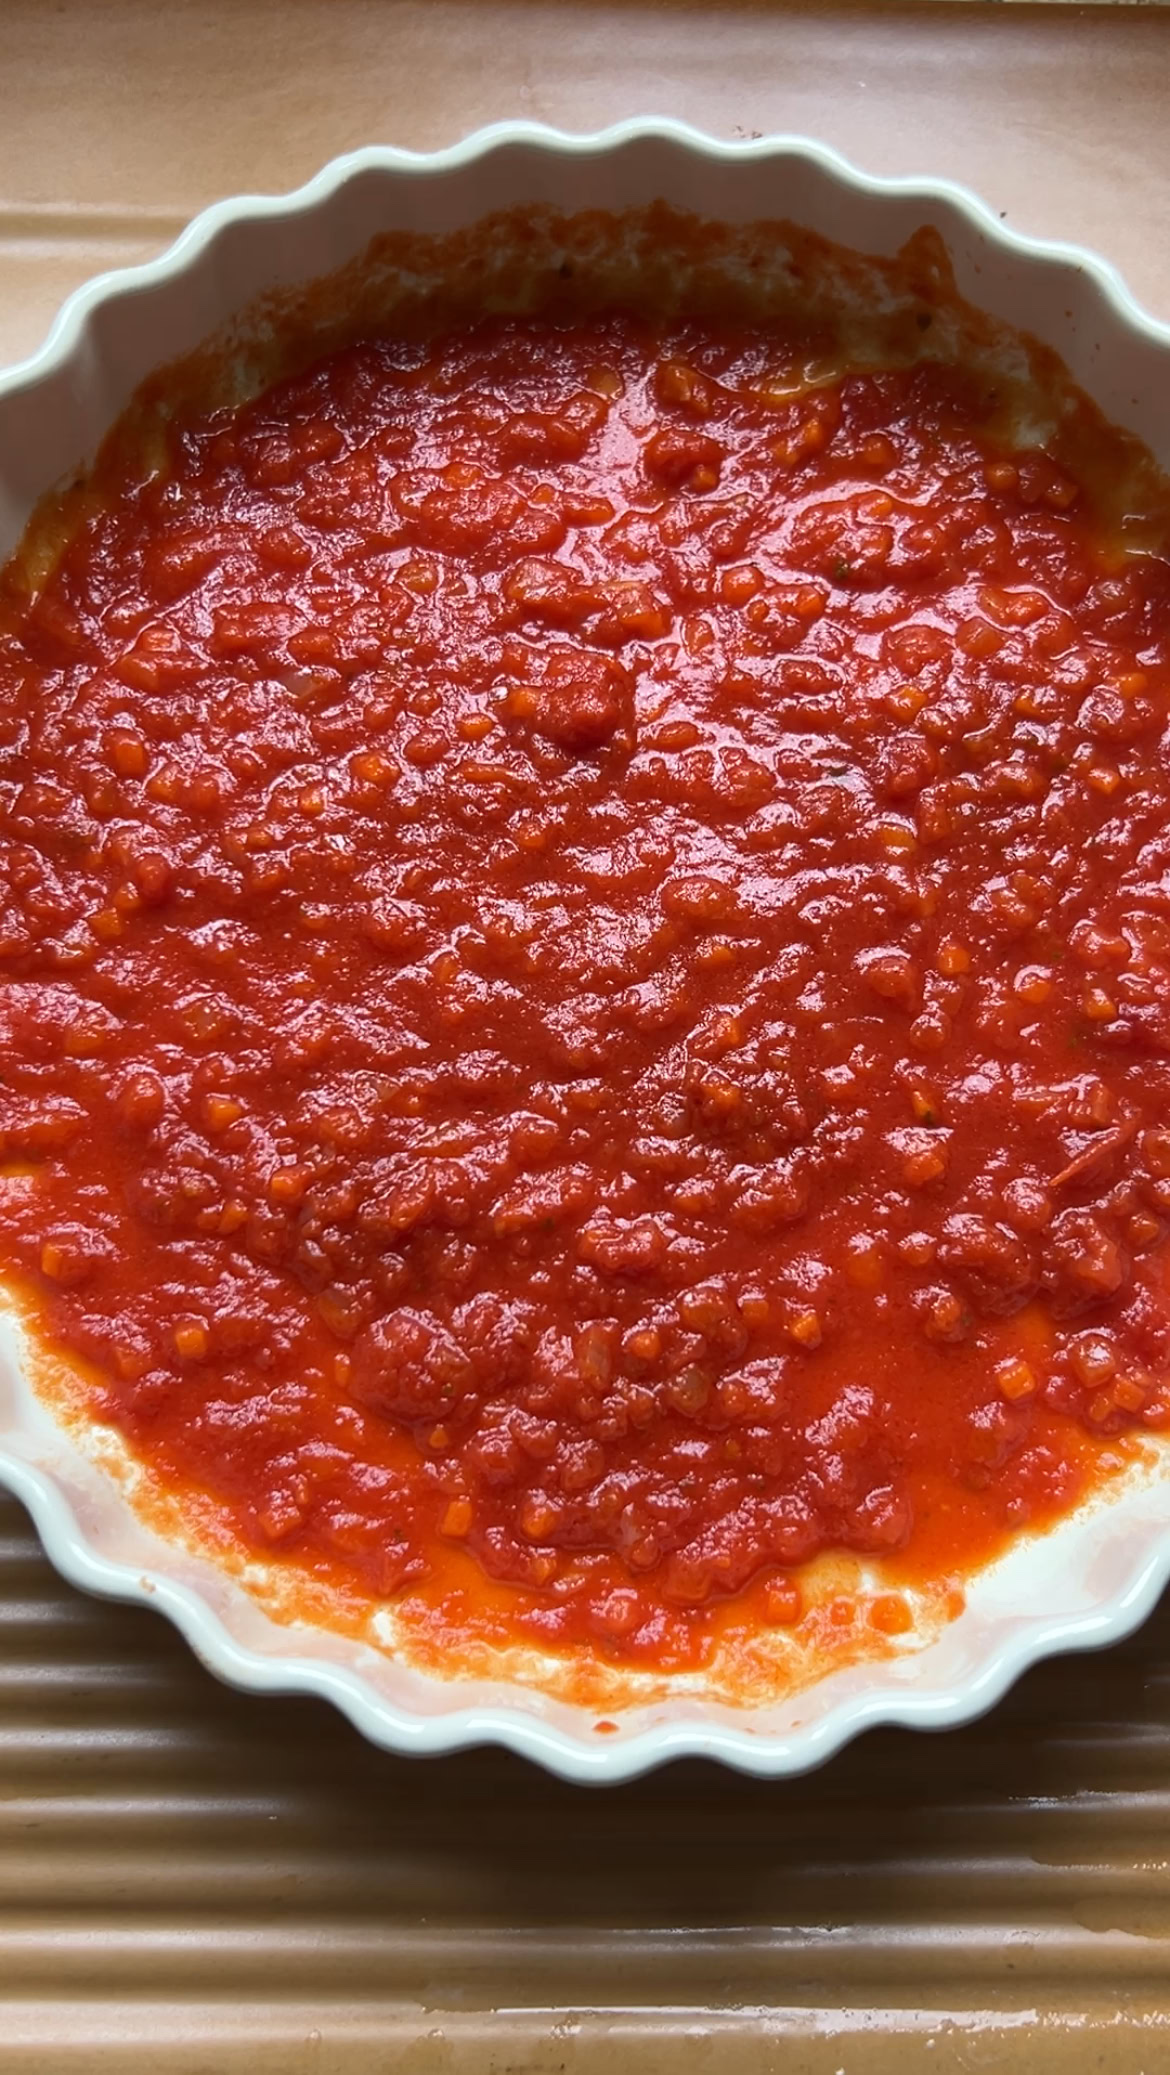 Tomato sauce in a large round dish.